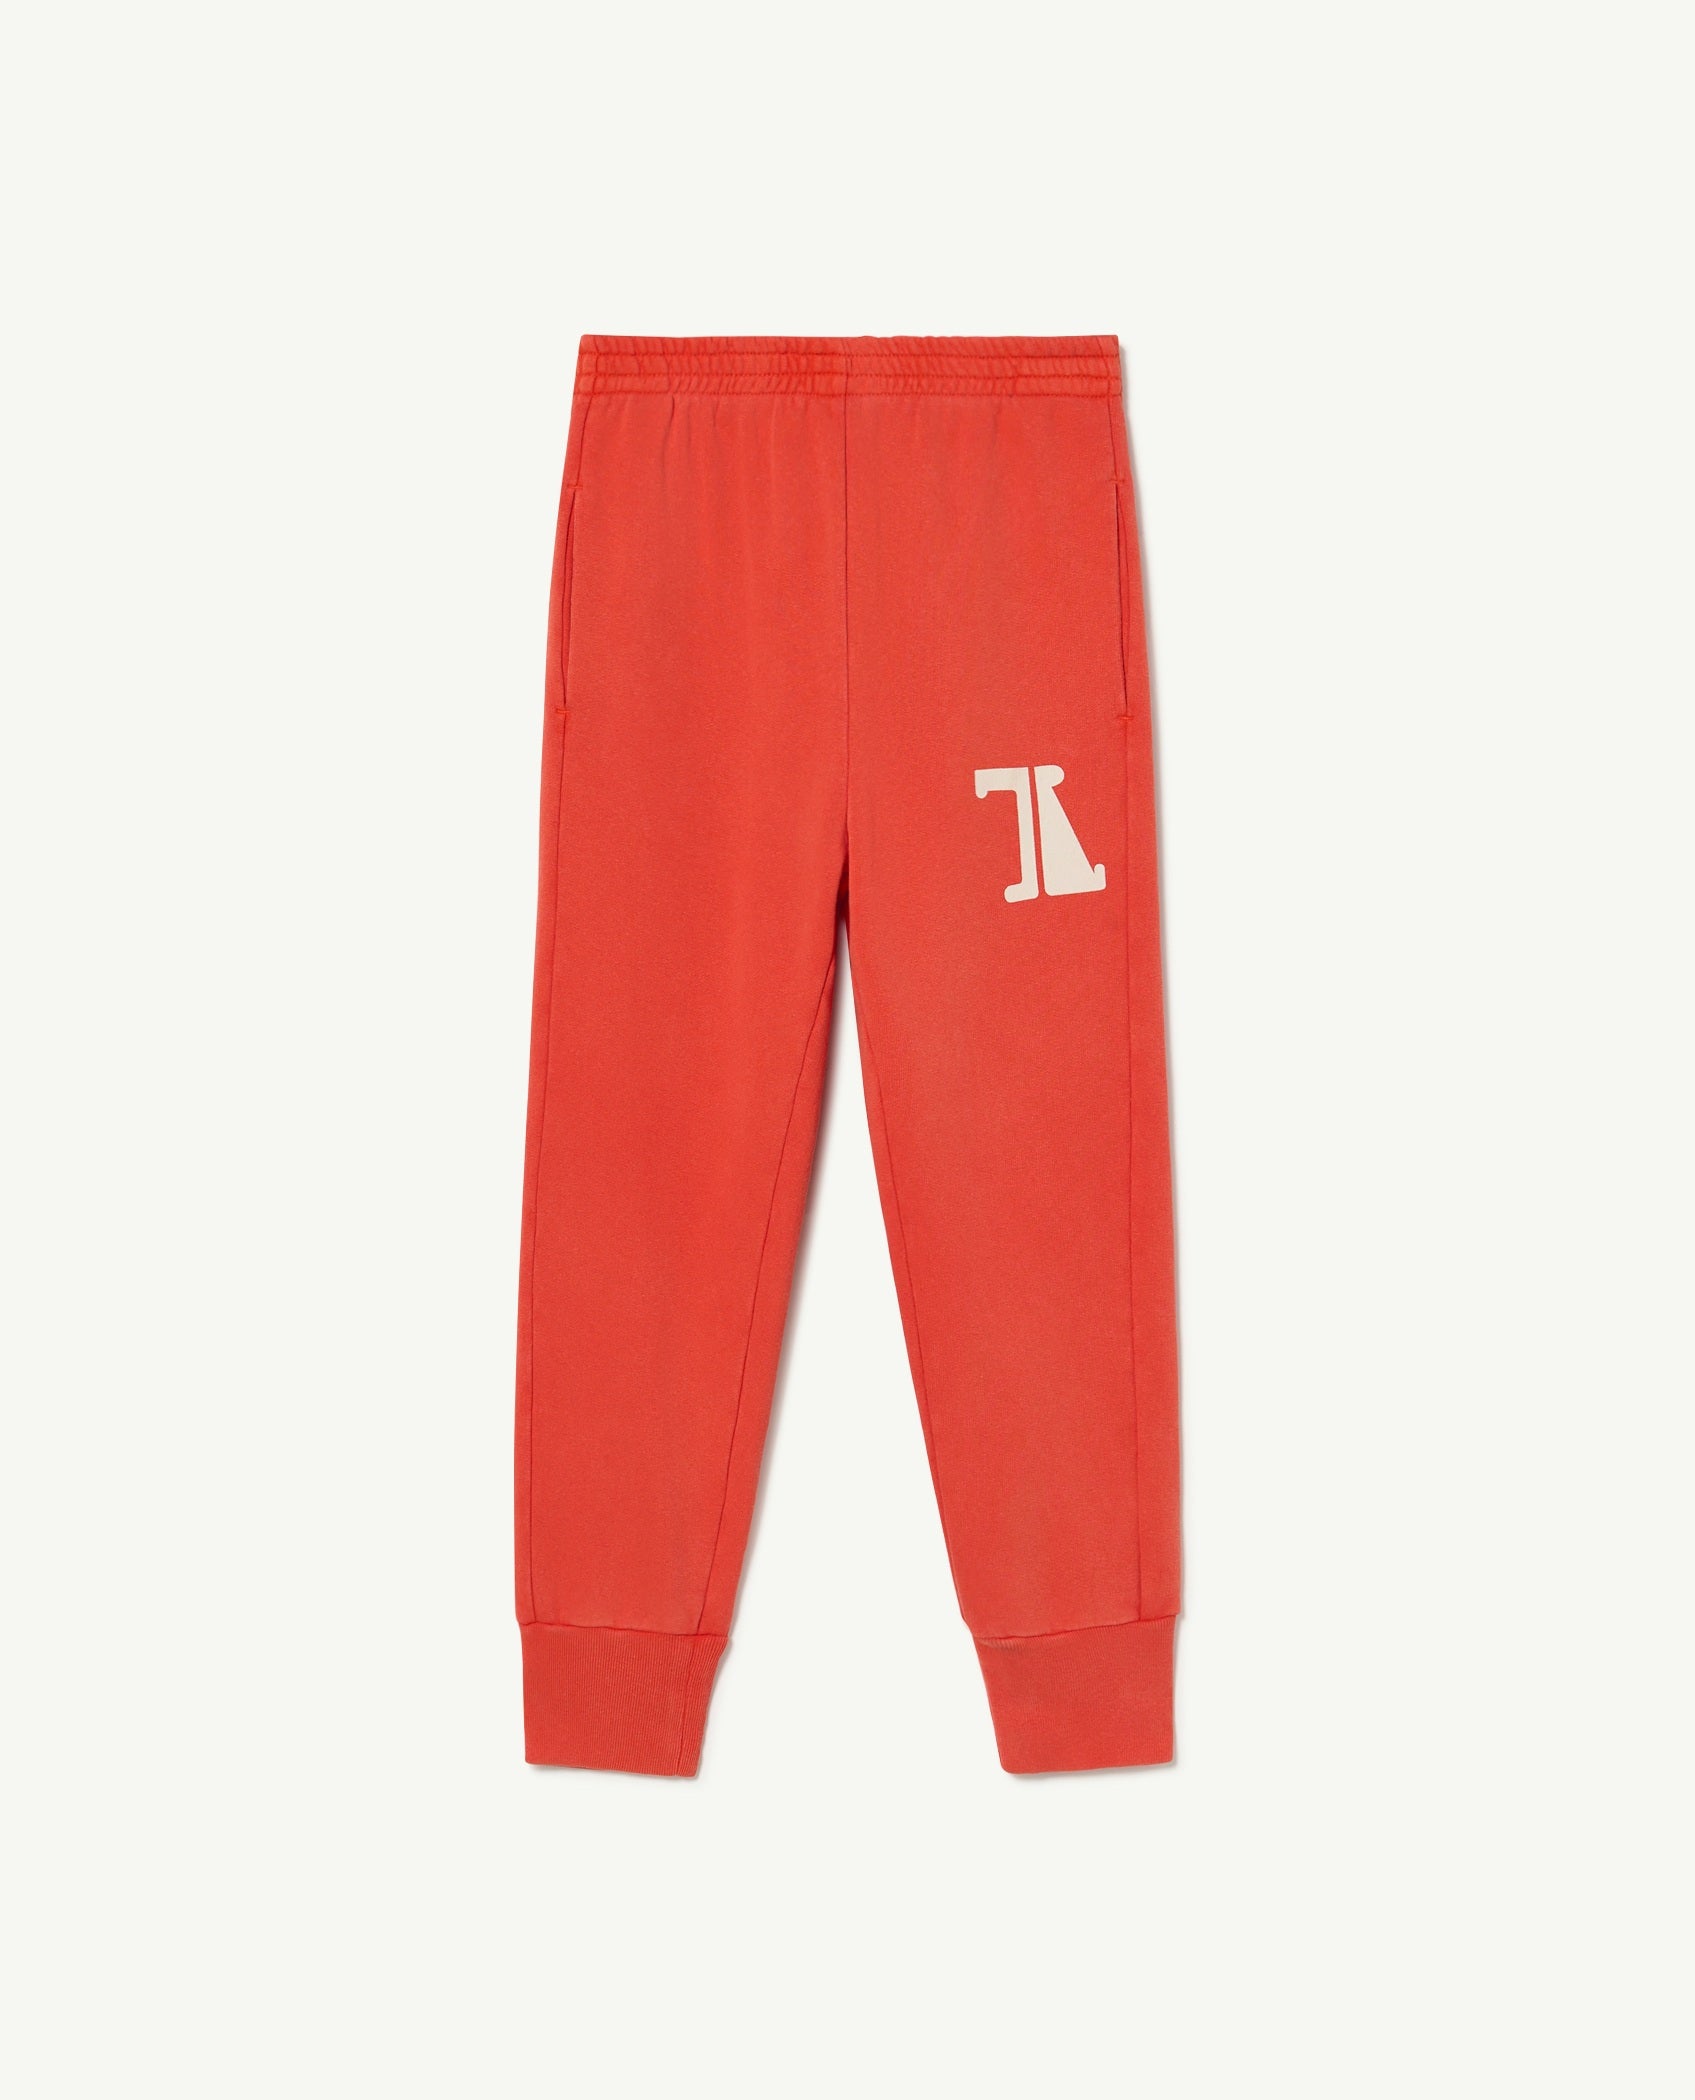 PANTHER PANTS RED